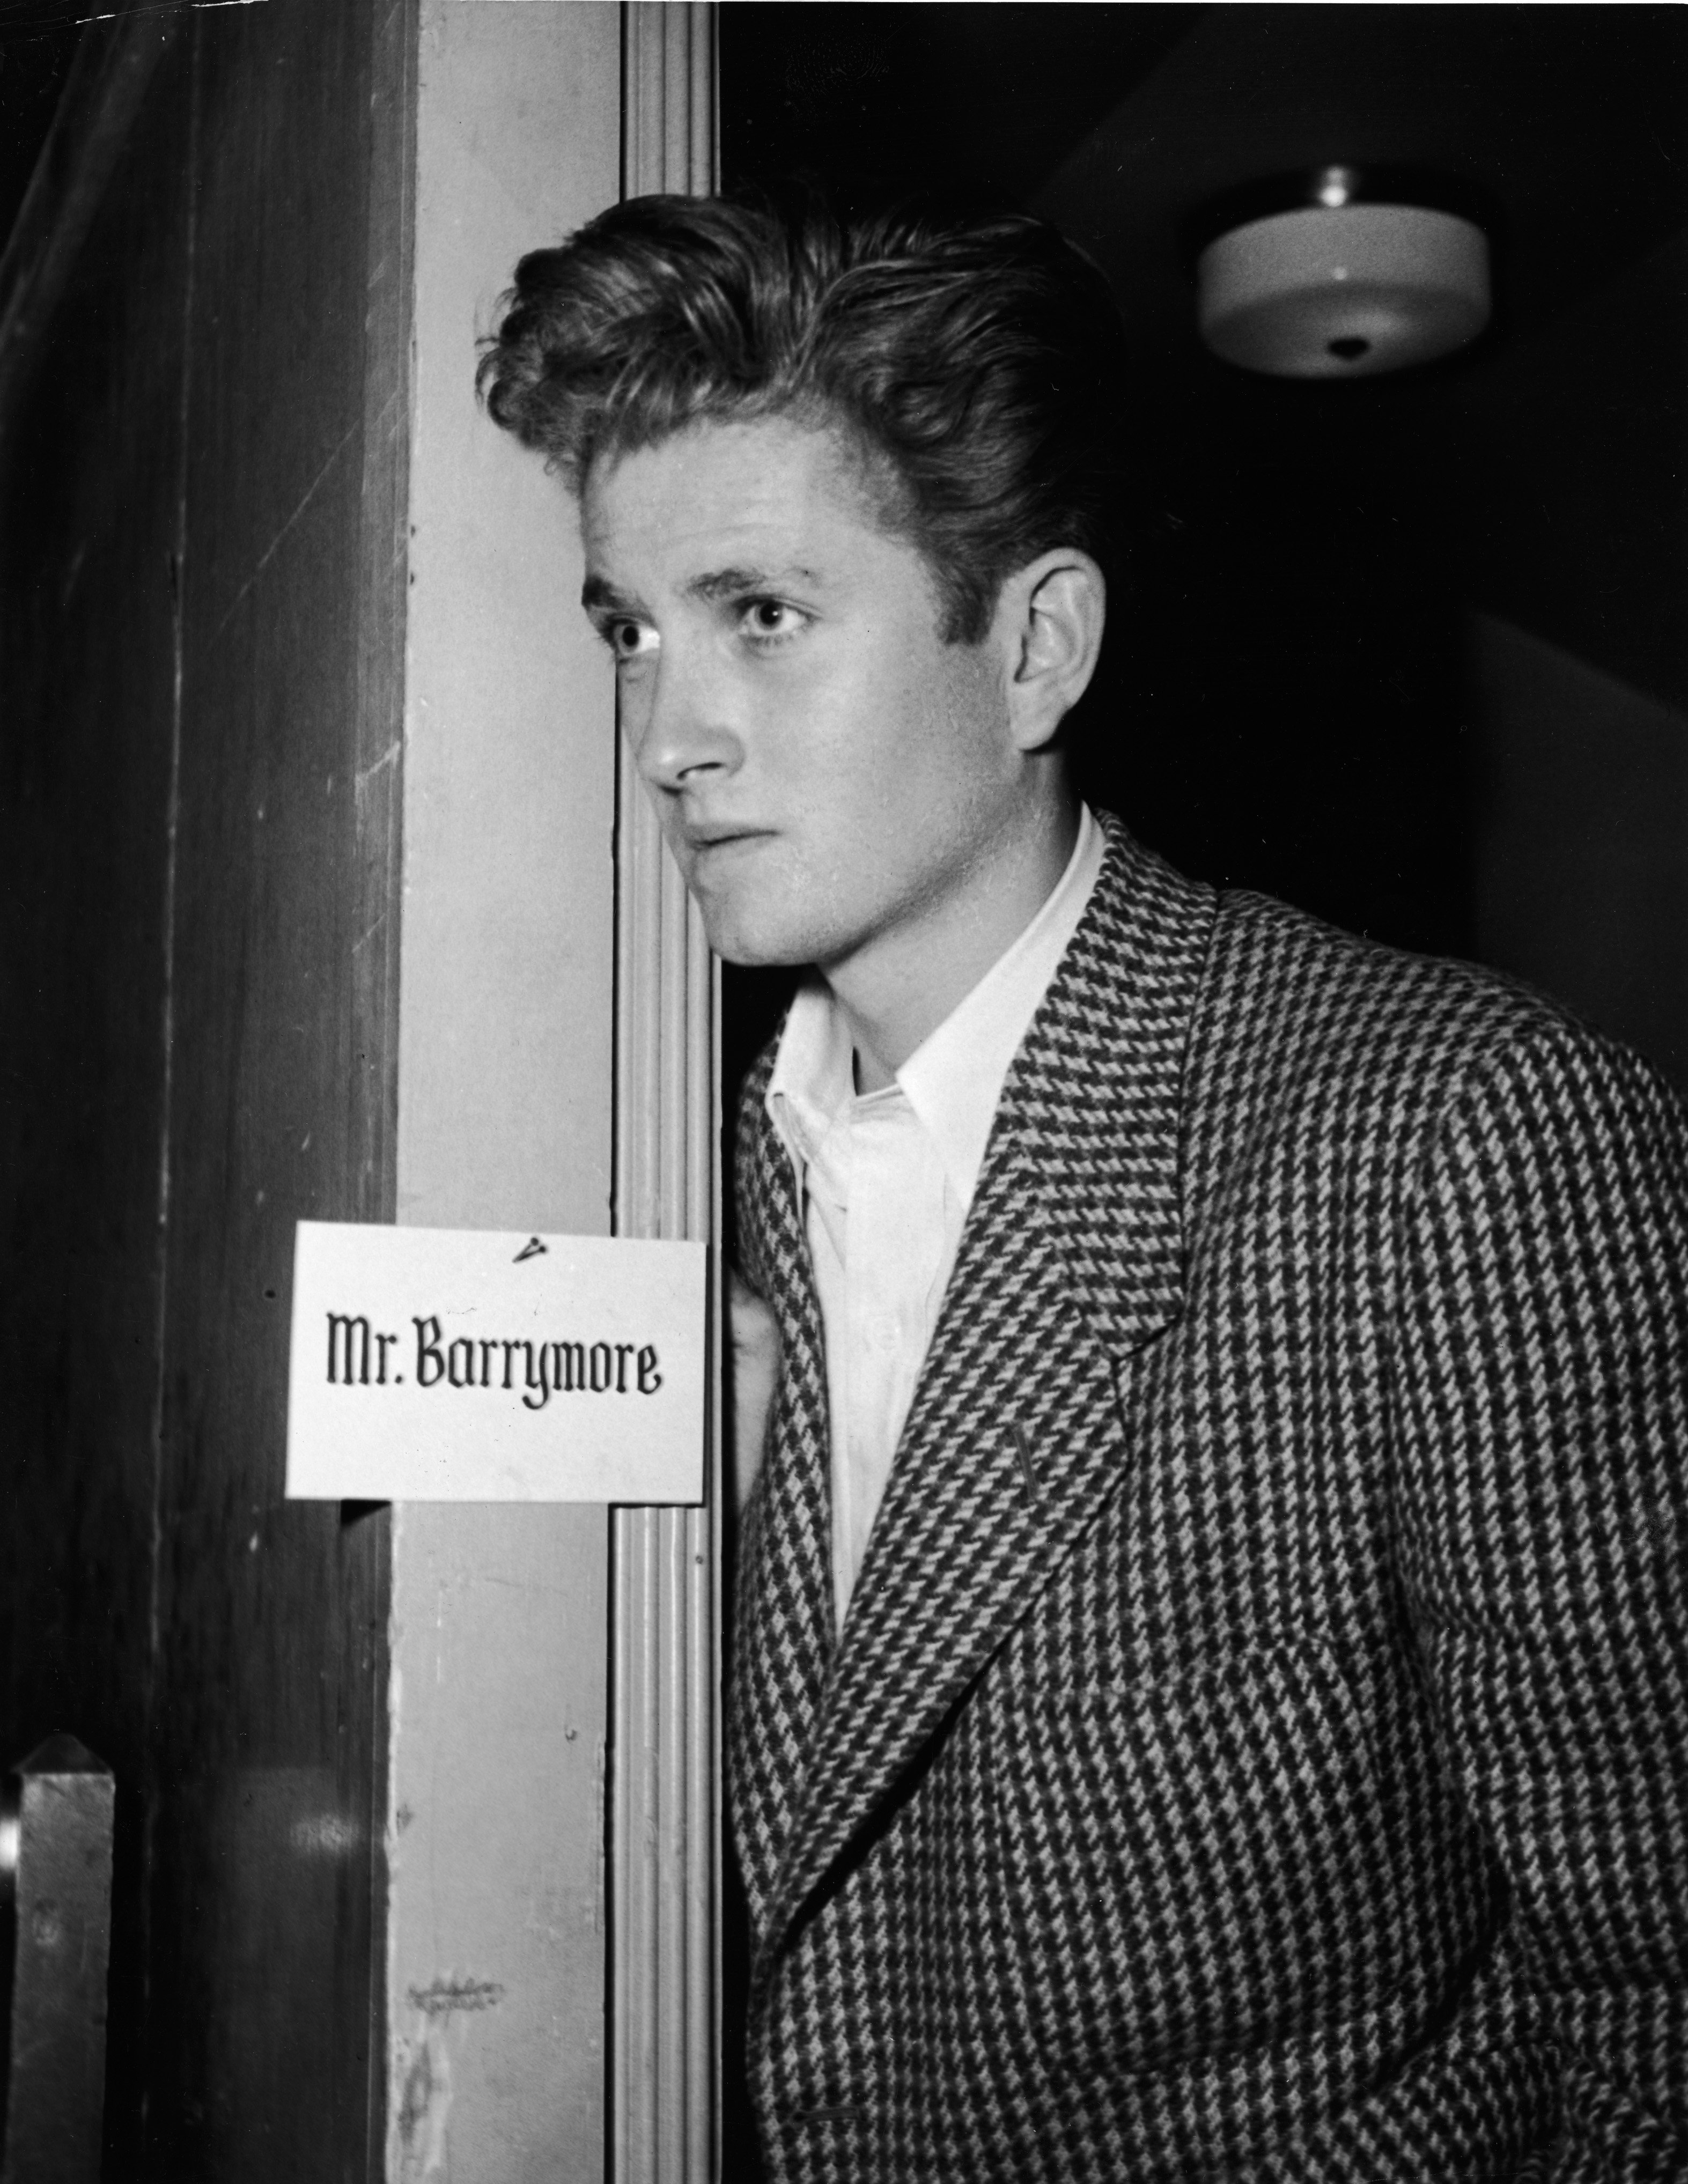 John Drew Barrymore on the set of "High Lonesome" circa 1950 | Source: Getty Images